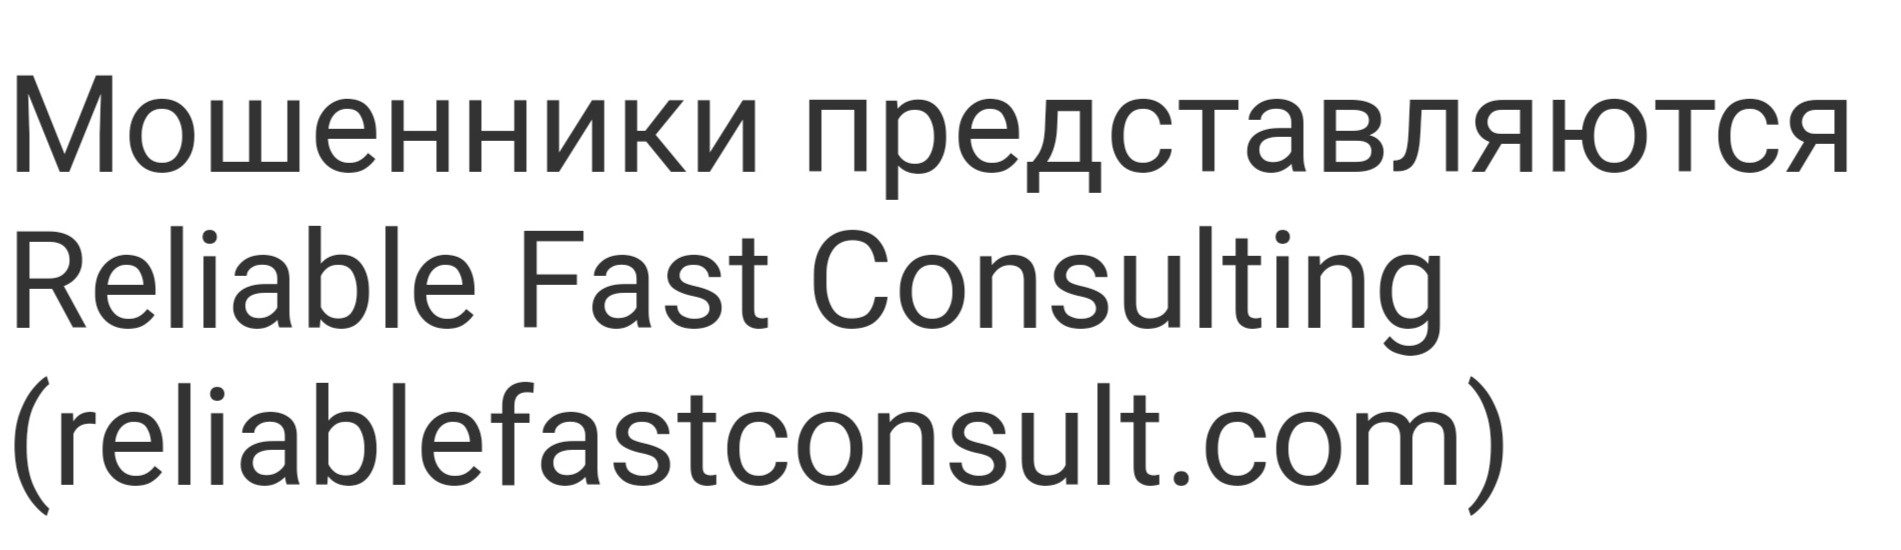 Reliable Fast Consulting отзывы